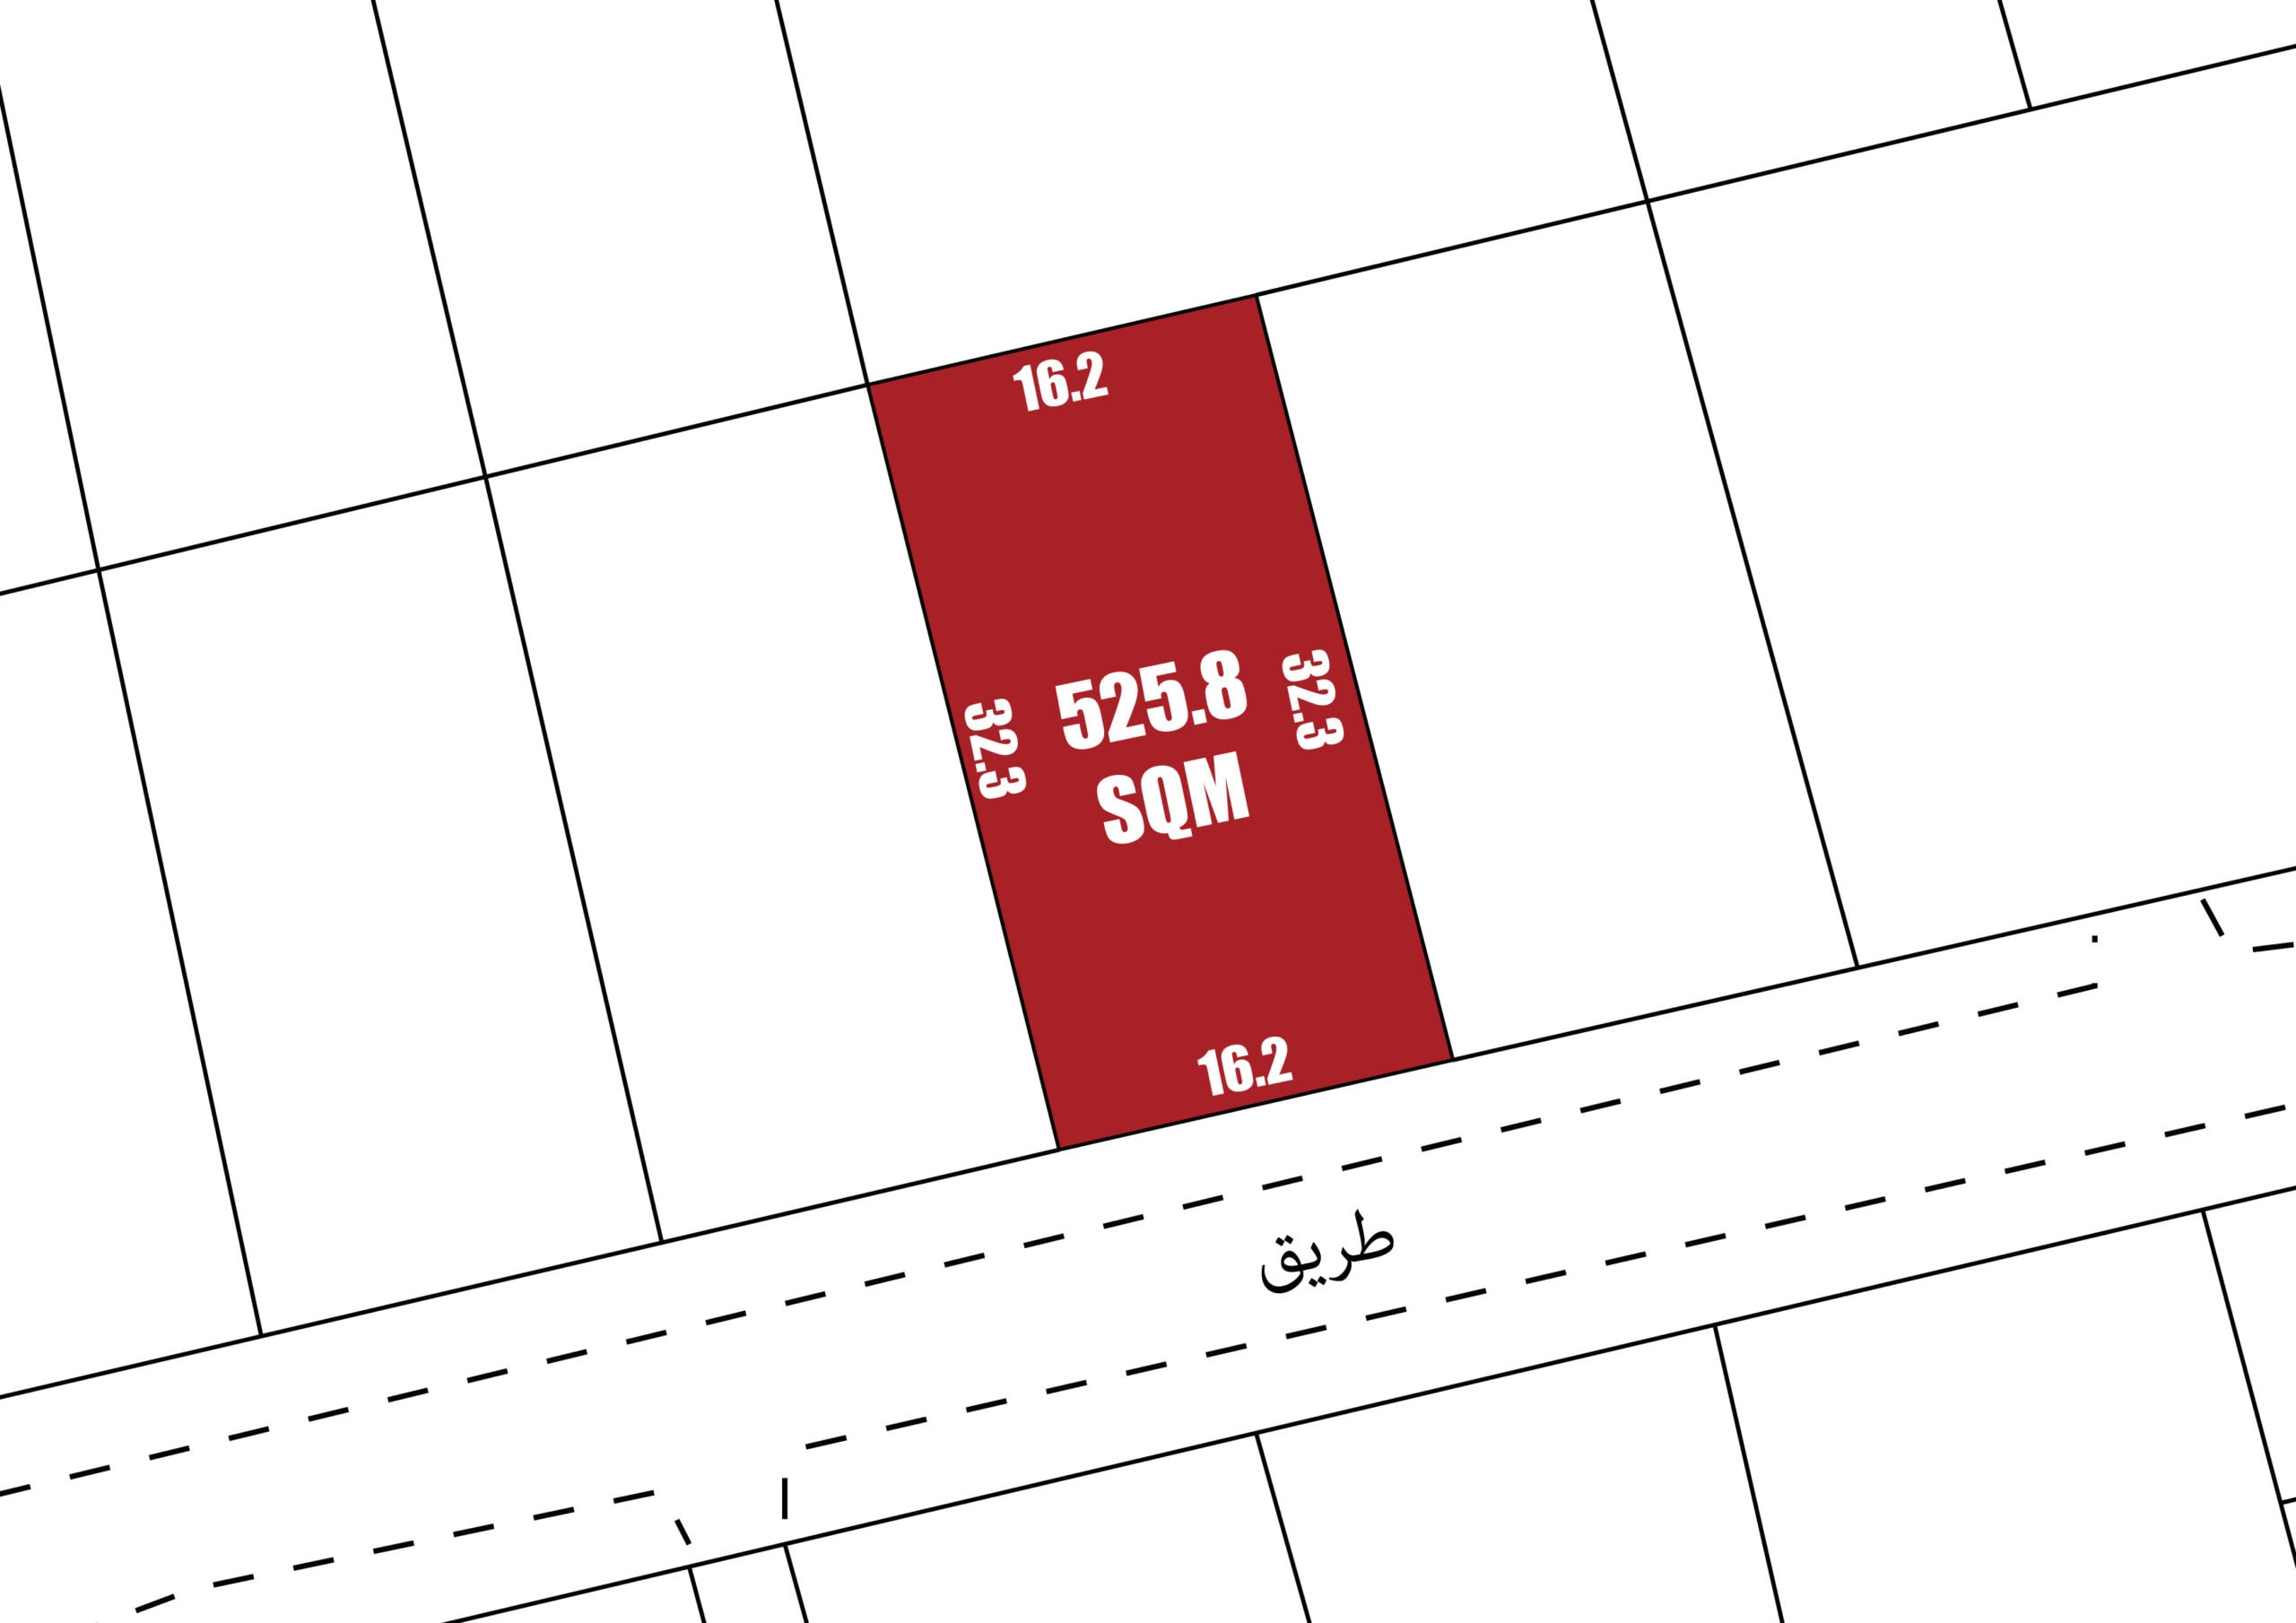 Illustration of a land plot in red with dimensions marked on each side, surrounded by an auto draft grid pattern and dashed boundary lines, labeled as 525.8 sqm.